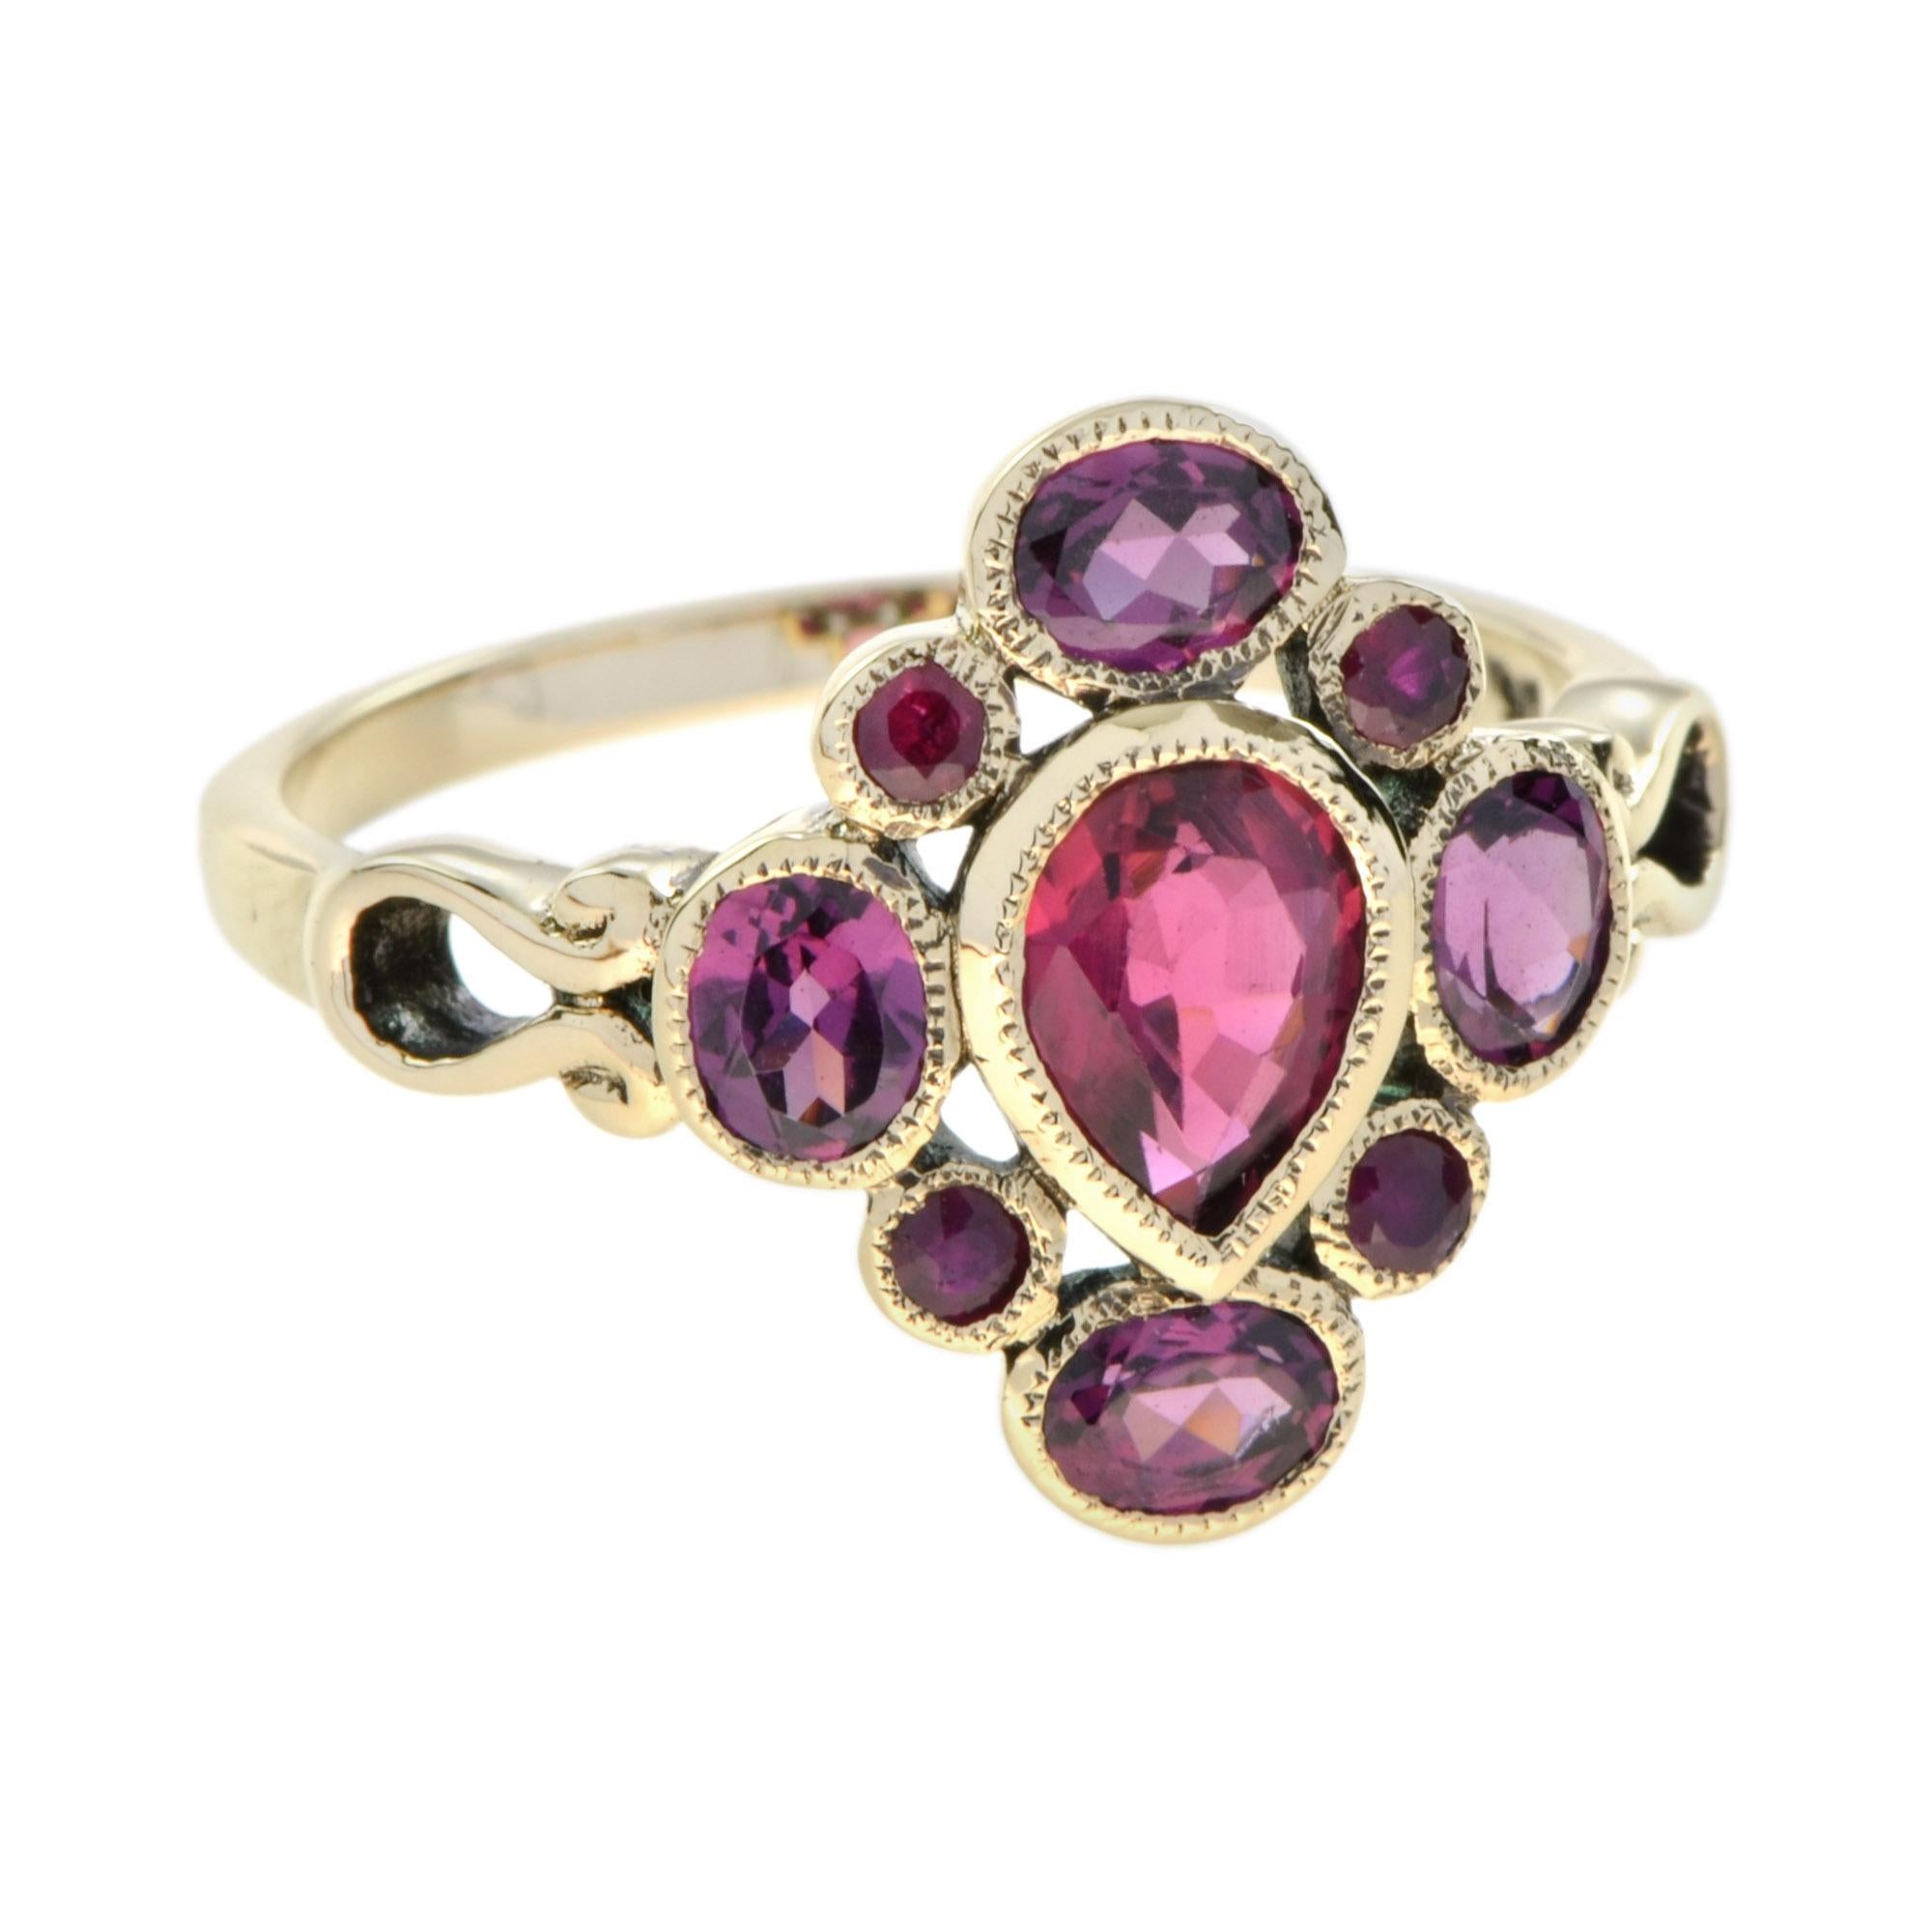 A perfect gift for a friend or family member, this red gemstones ring is fashioned in popular 9k yellow gold and features a cluster of rubies and rhodolite surrounding the center pear shaped pink tourmaline. 

Information
Style: Vintage
Metal: 9K